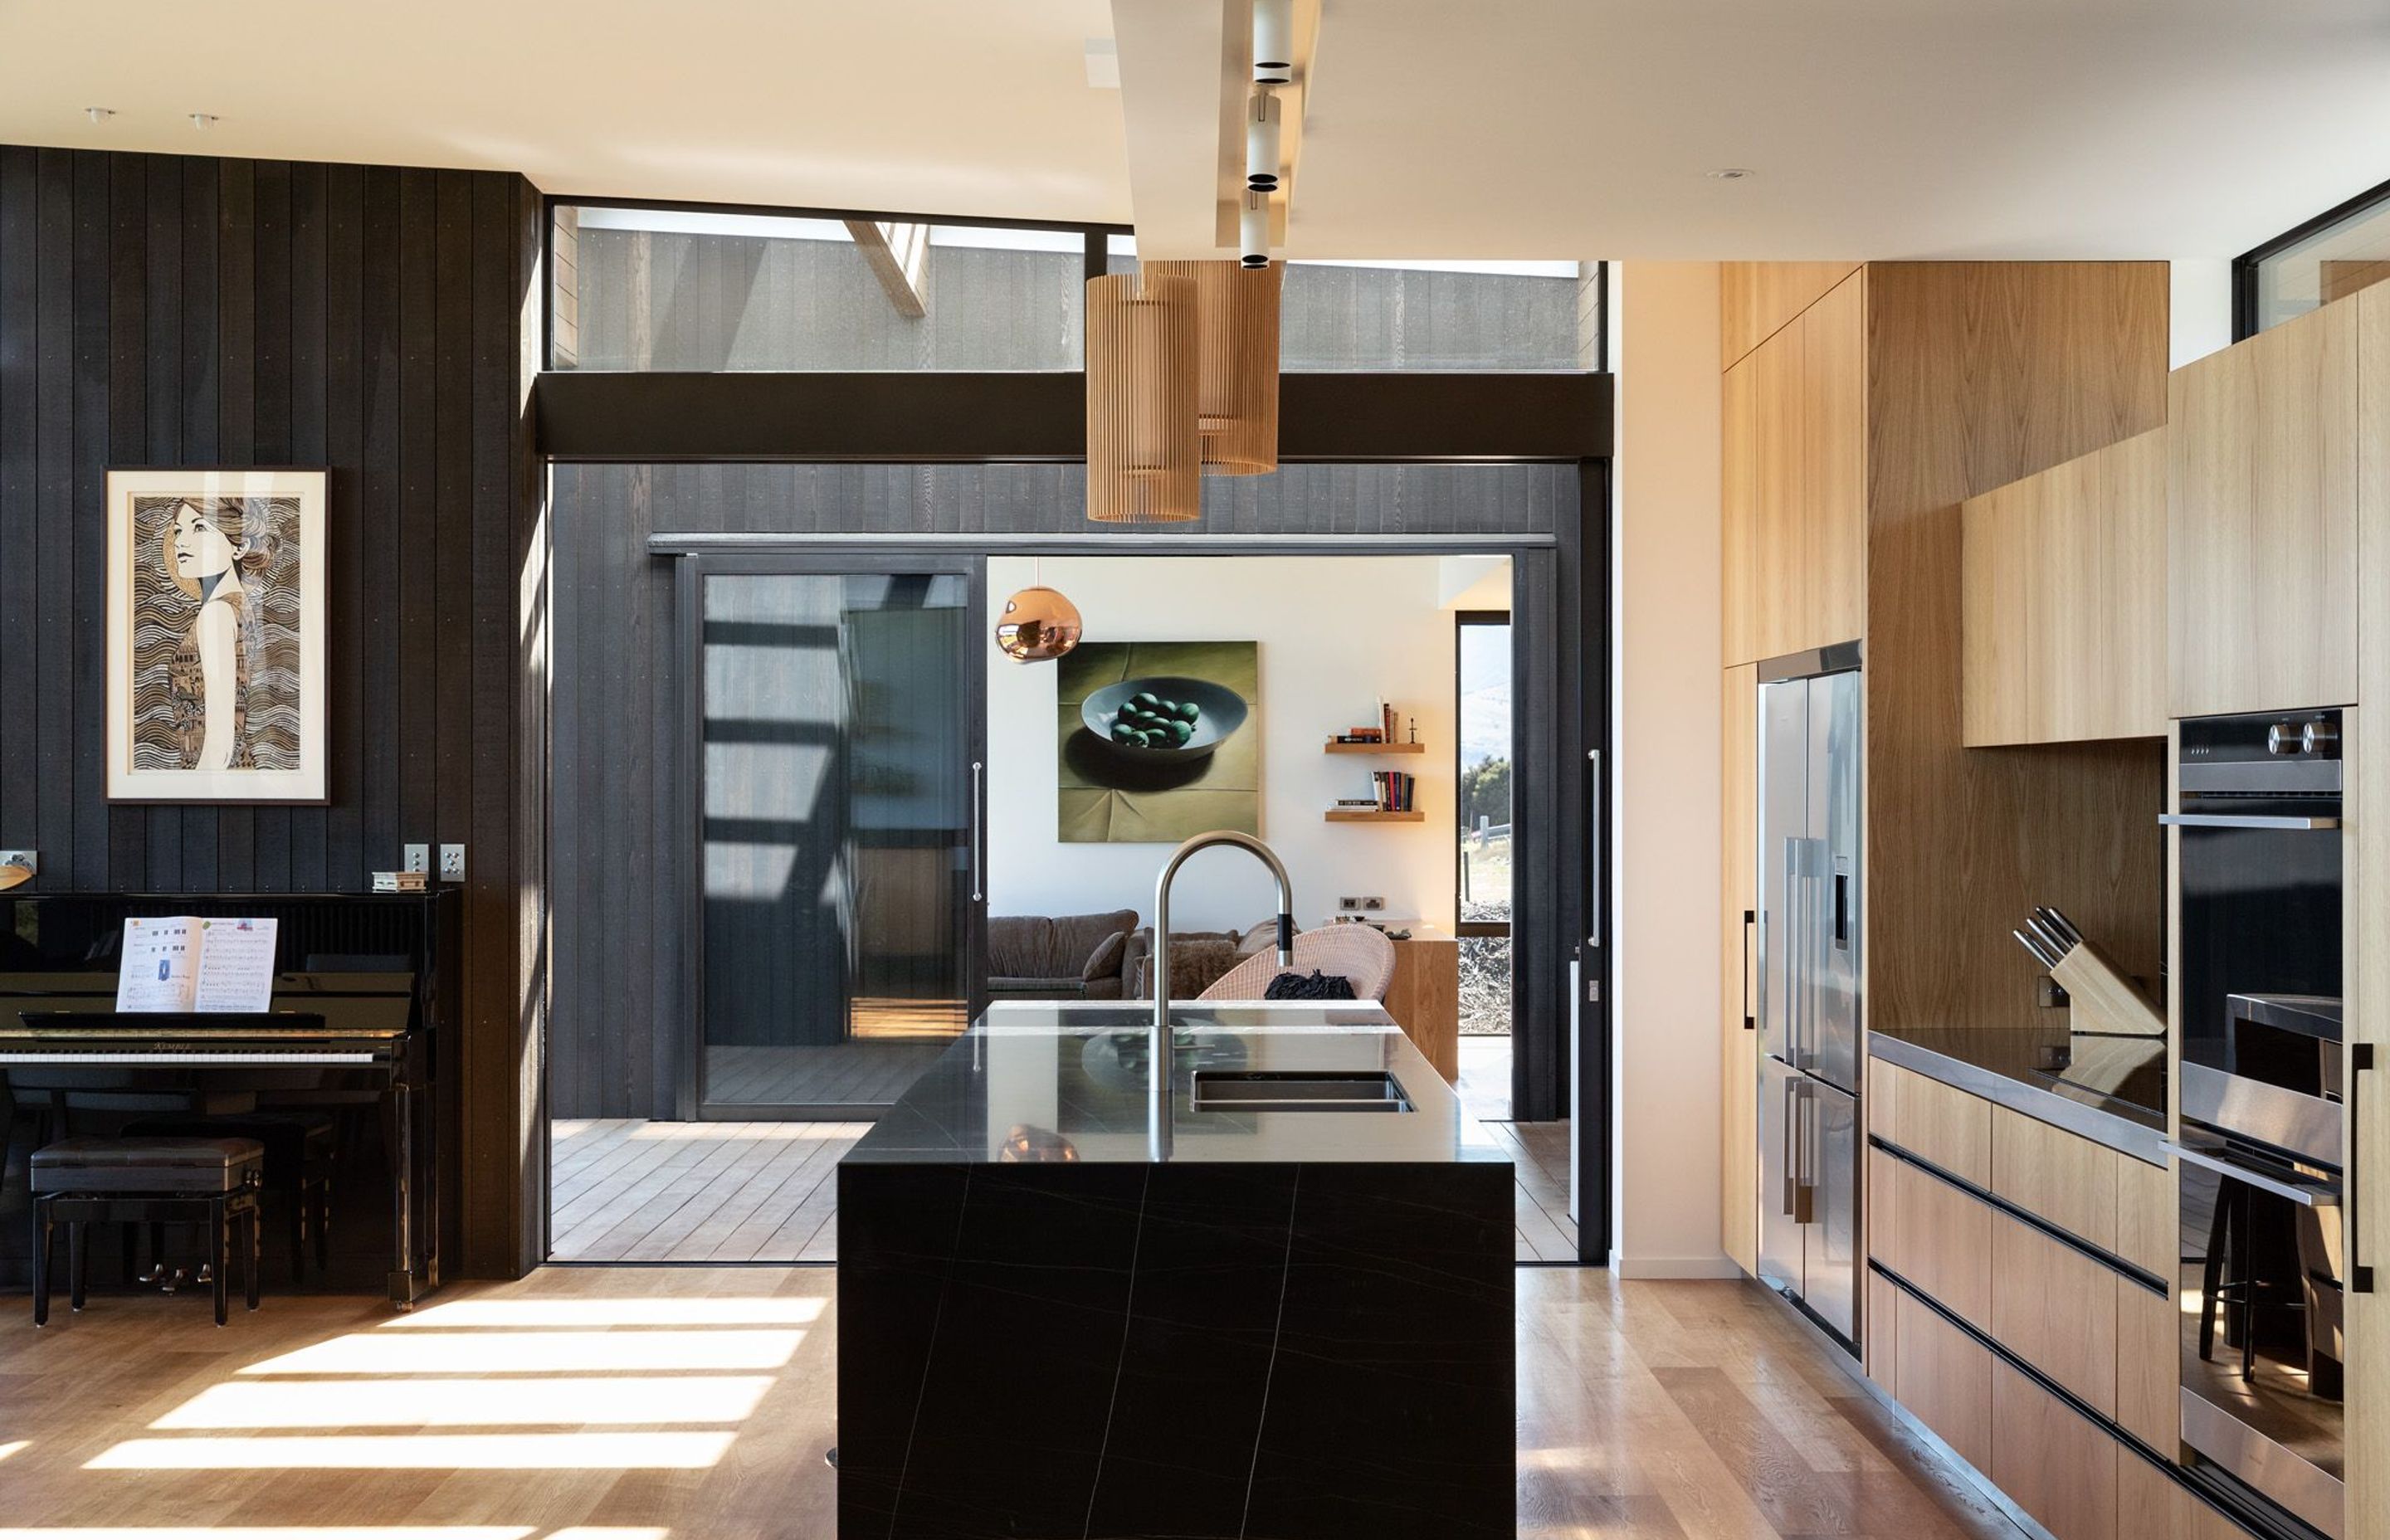 The kitchen gets east-facing morning sun through high windows over the cabinetry, and north-facing sun through high windows above the doors to the outdoor entertaining area. 